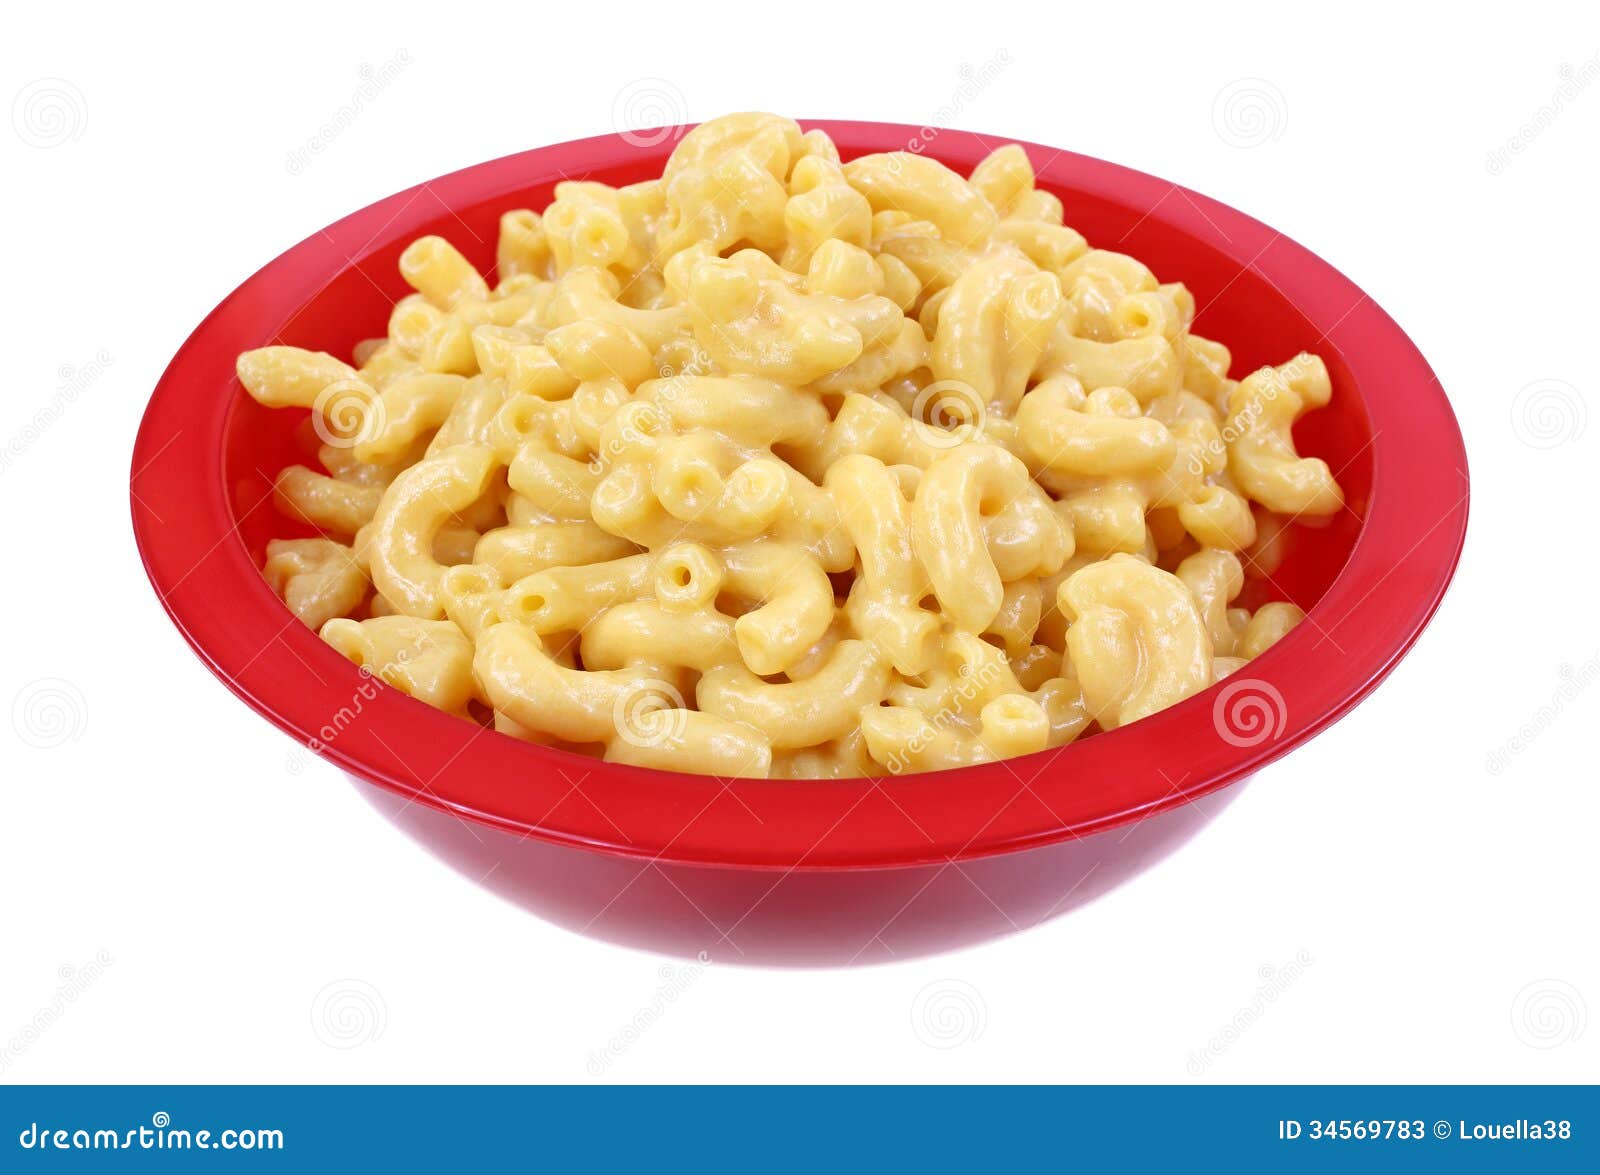 Macaroni And Cheese Balls Homemade Red Healthy Photo Background And Picture  For Free Download - Pngtree